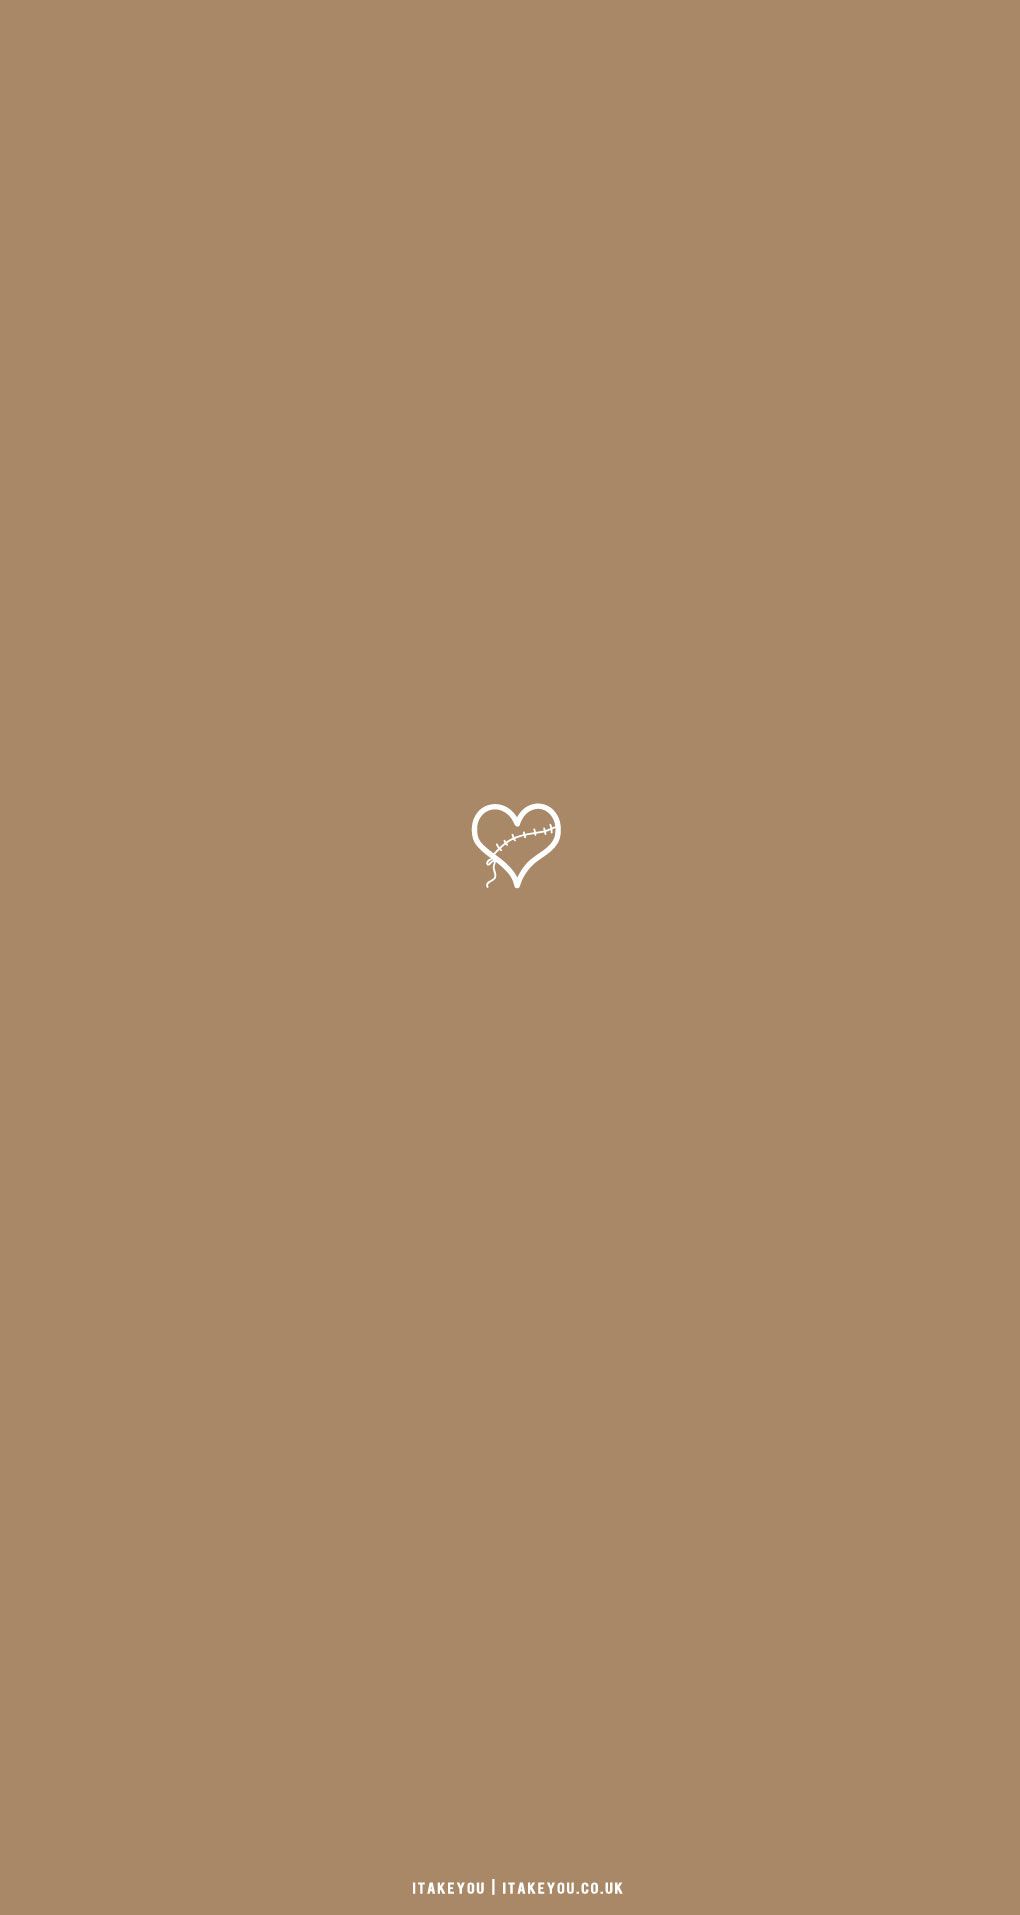 Cute Brown Aesthetic Wallpaper for Phone : Stitched Heart Minimalist I Take You. Wedding Readings. Wedding Ideas